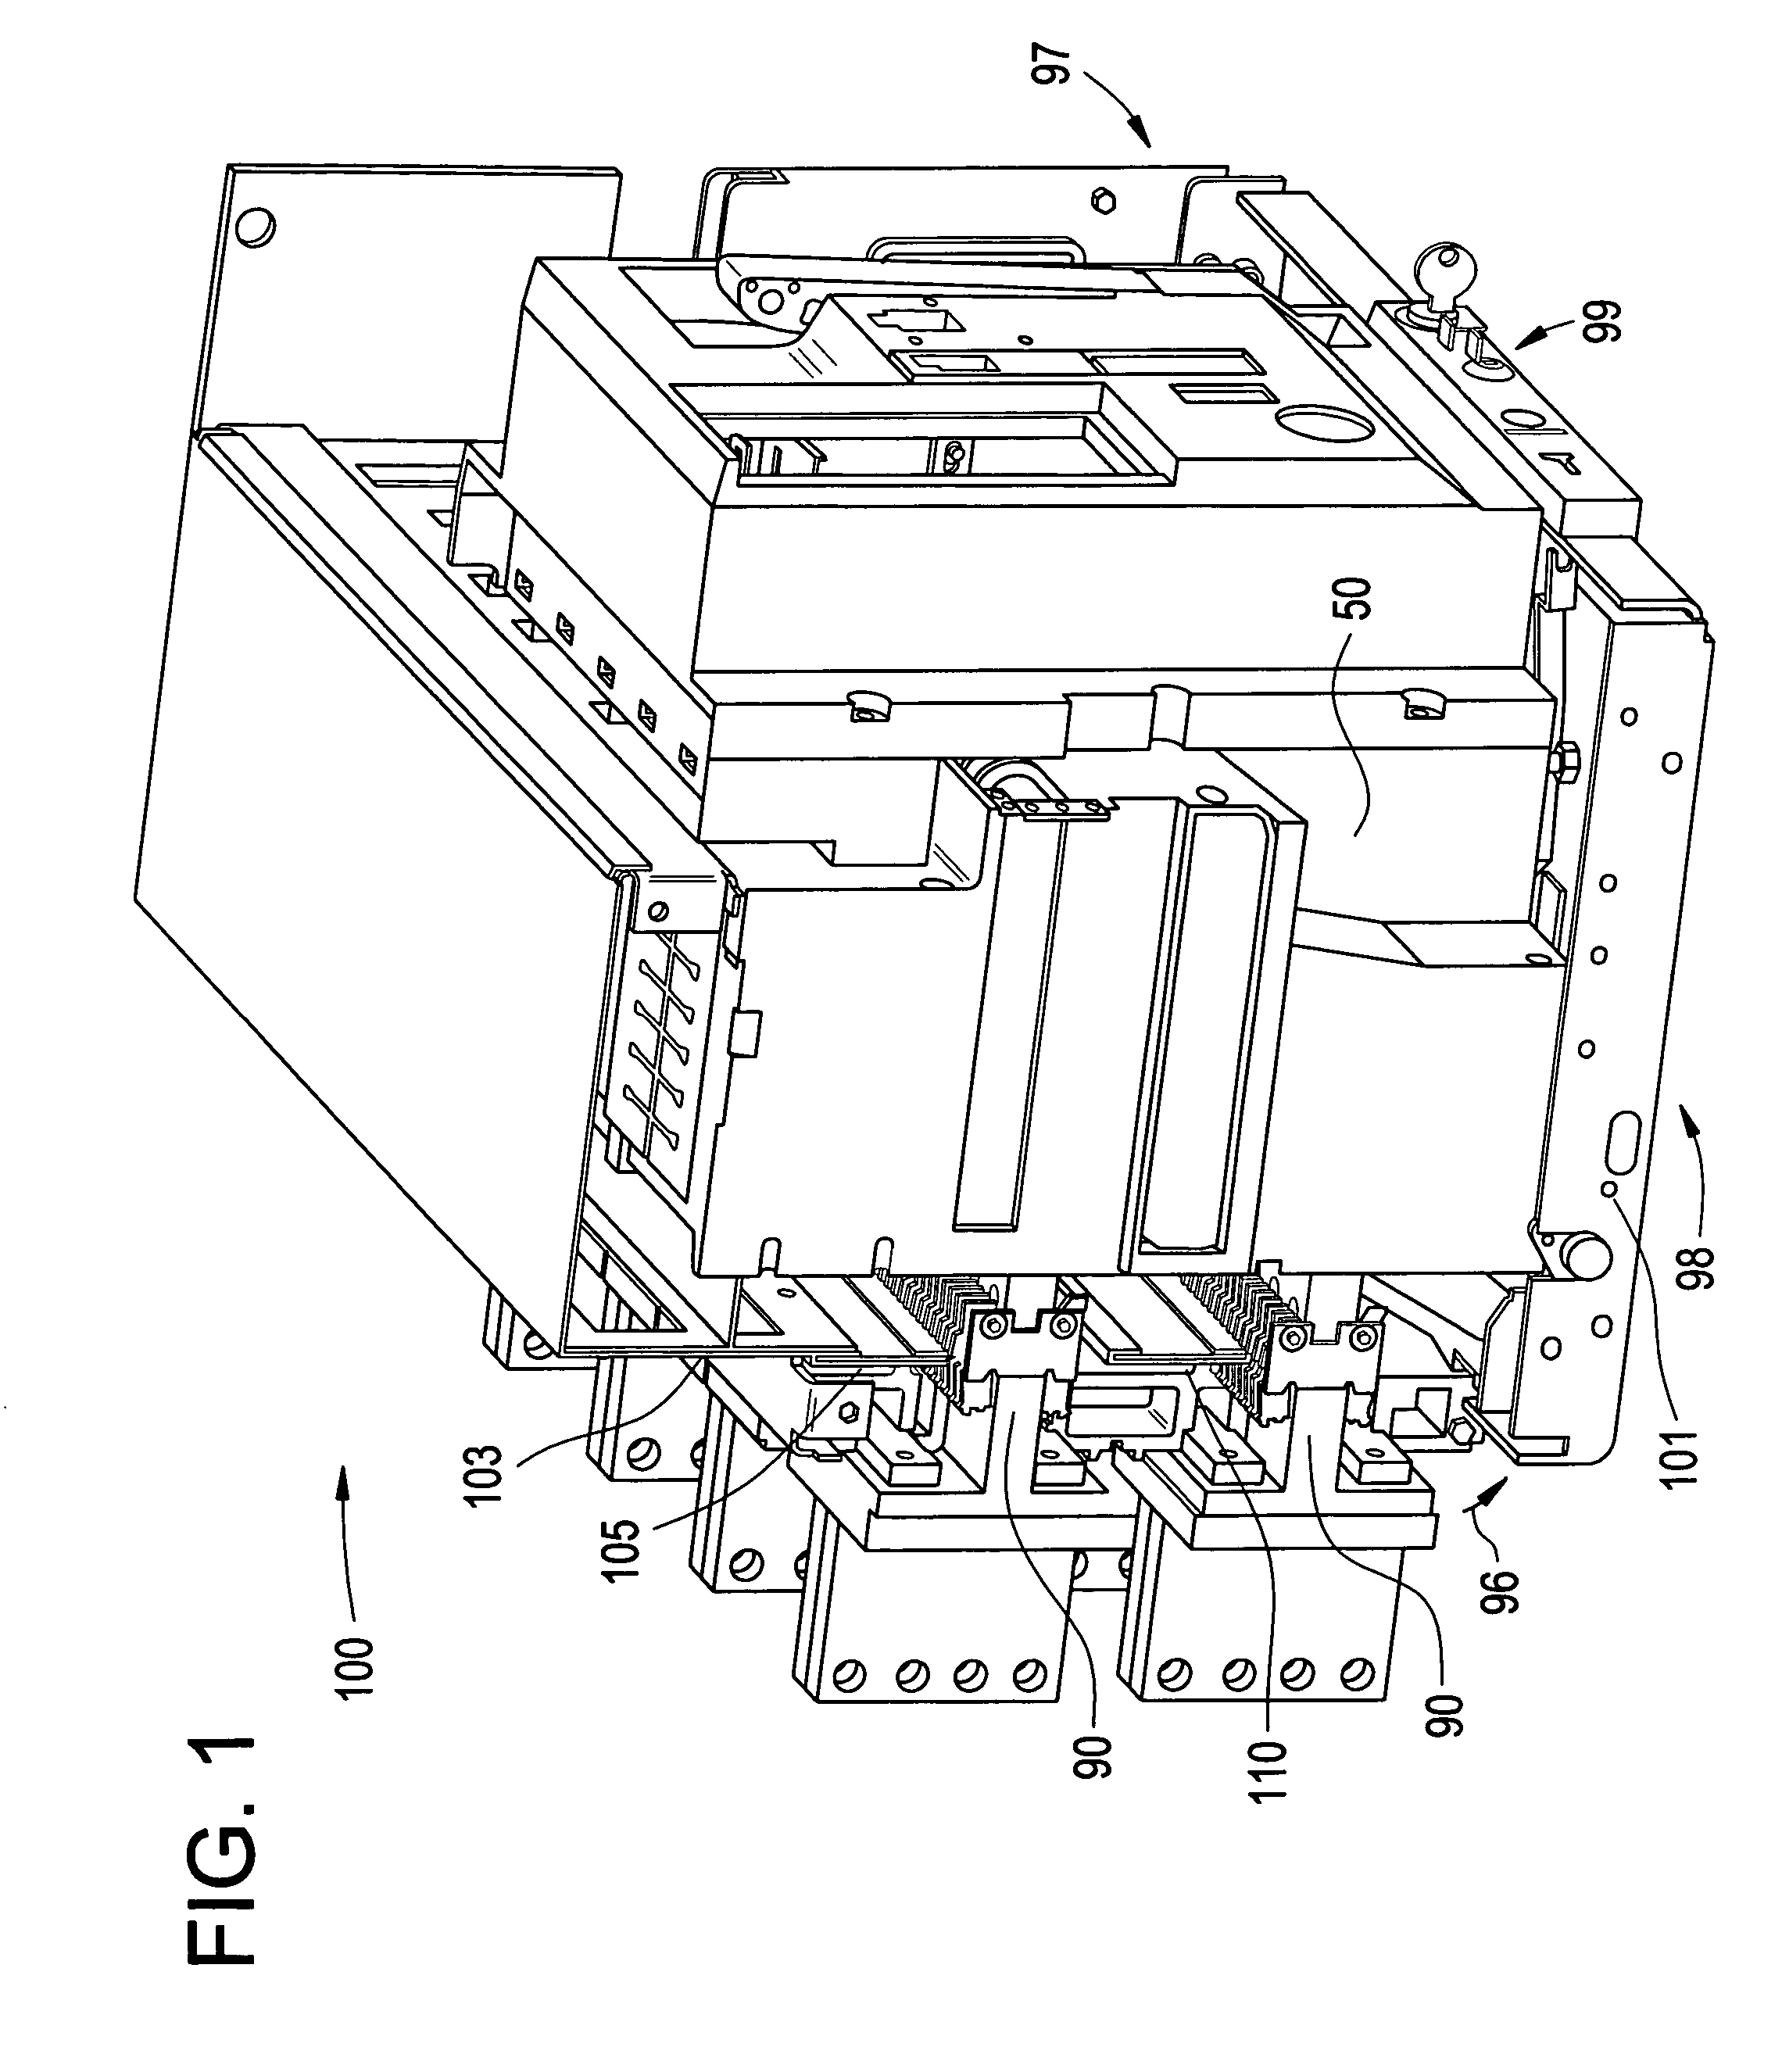 Shutter locking system for draw-out circuit breakers and method of assembly thereof